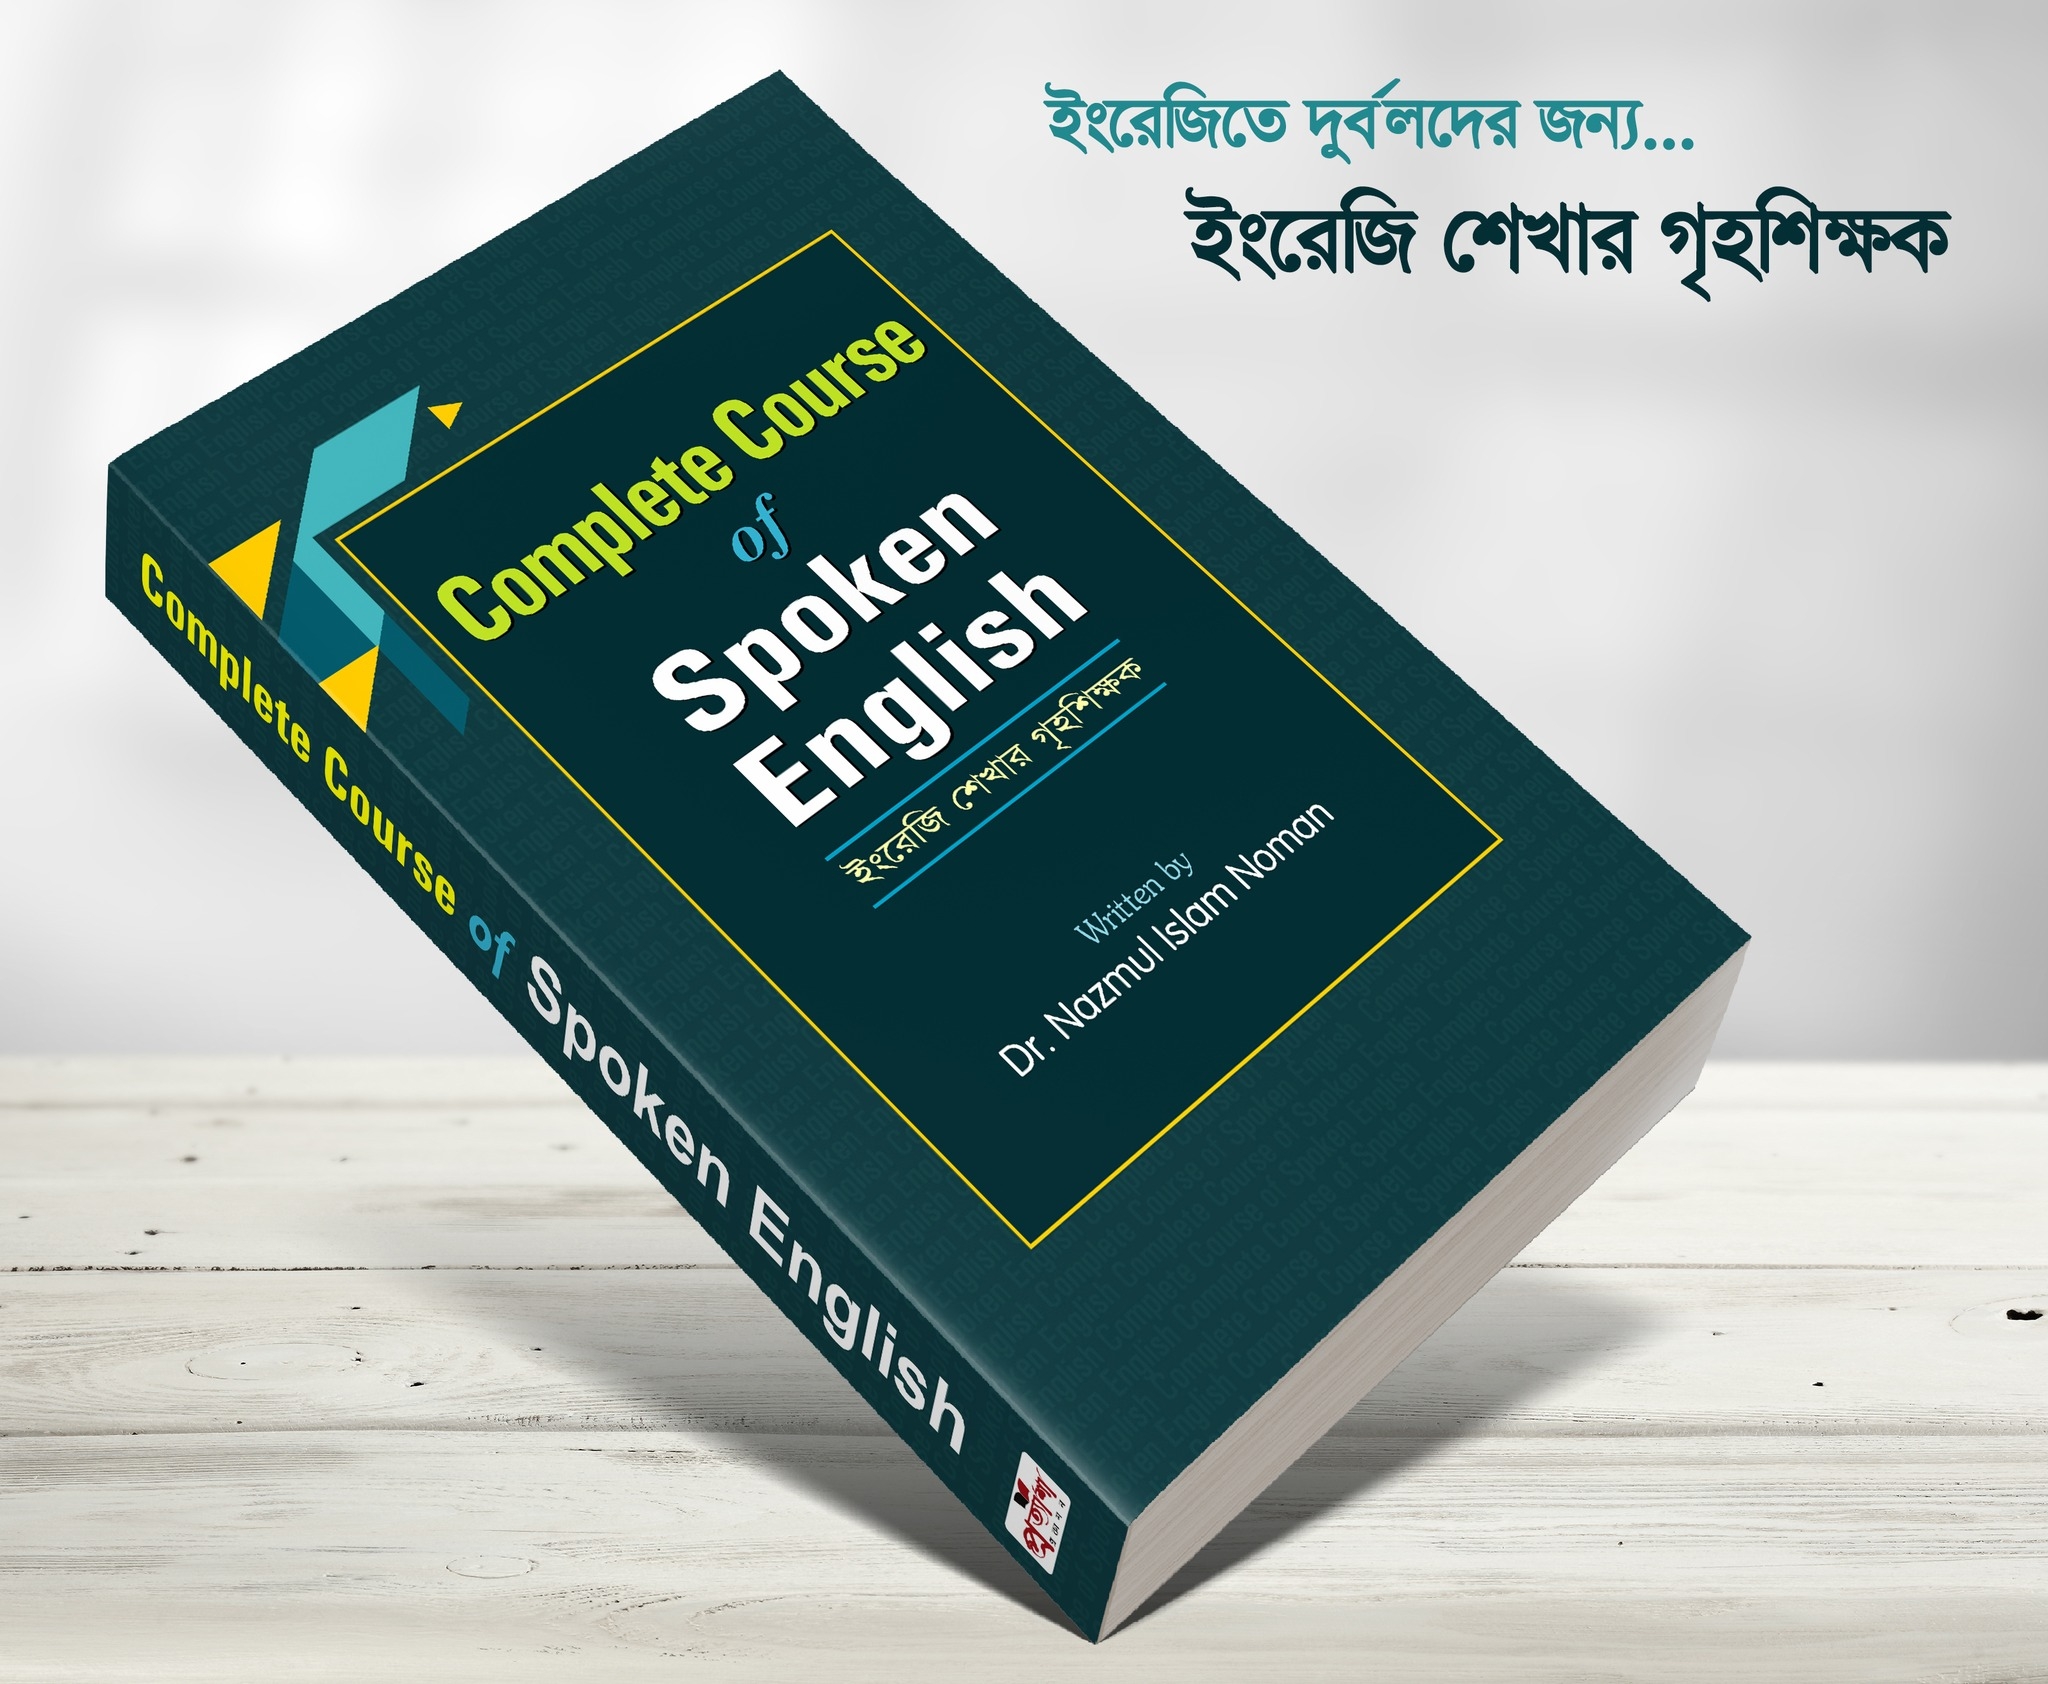 Complete Course of Spoken English By - Dr. Nazmul Islam Noman